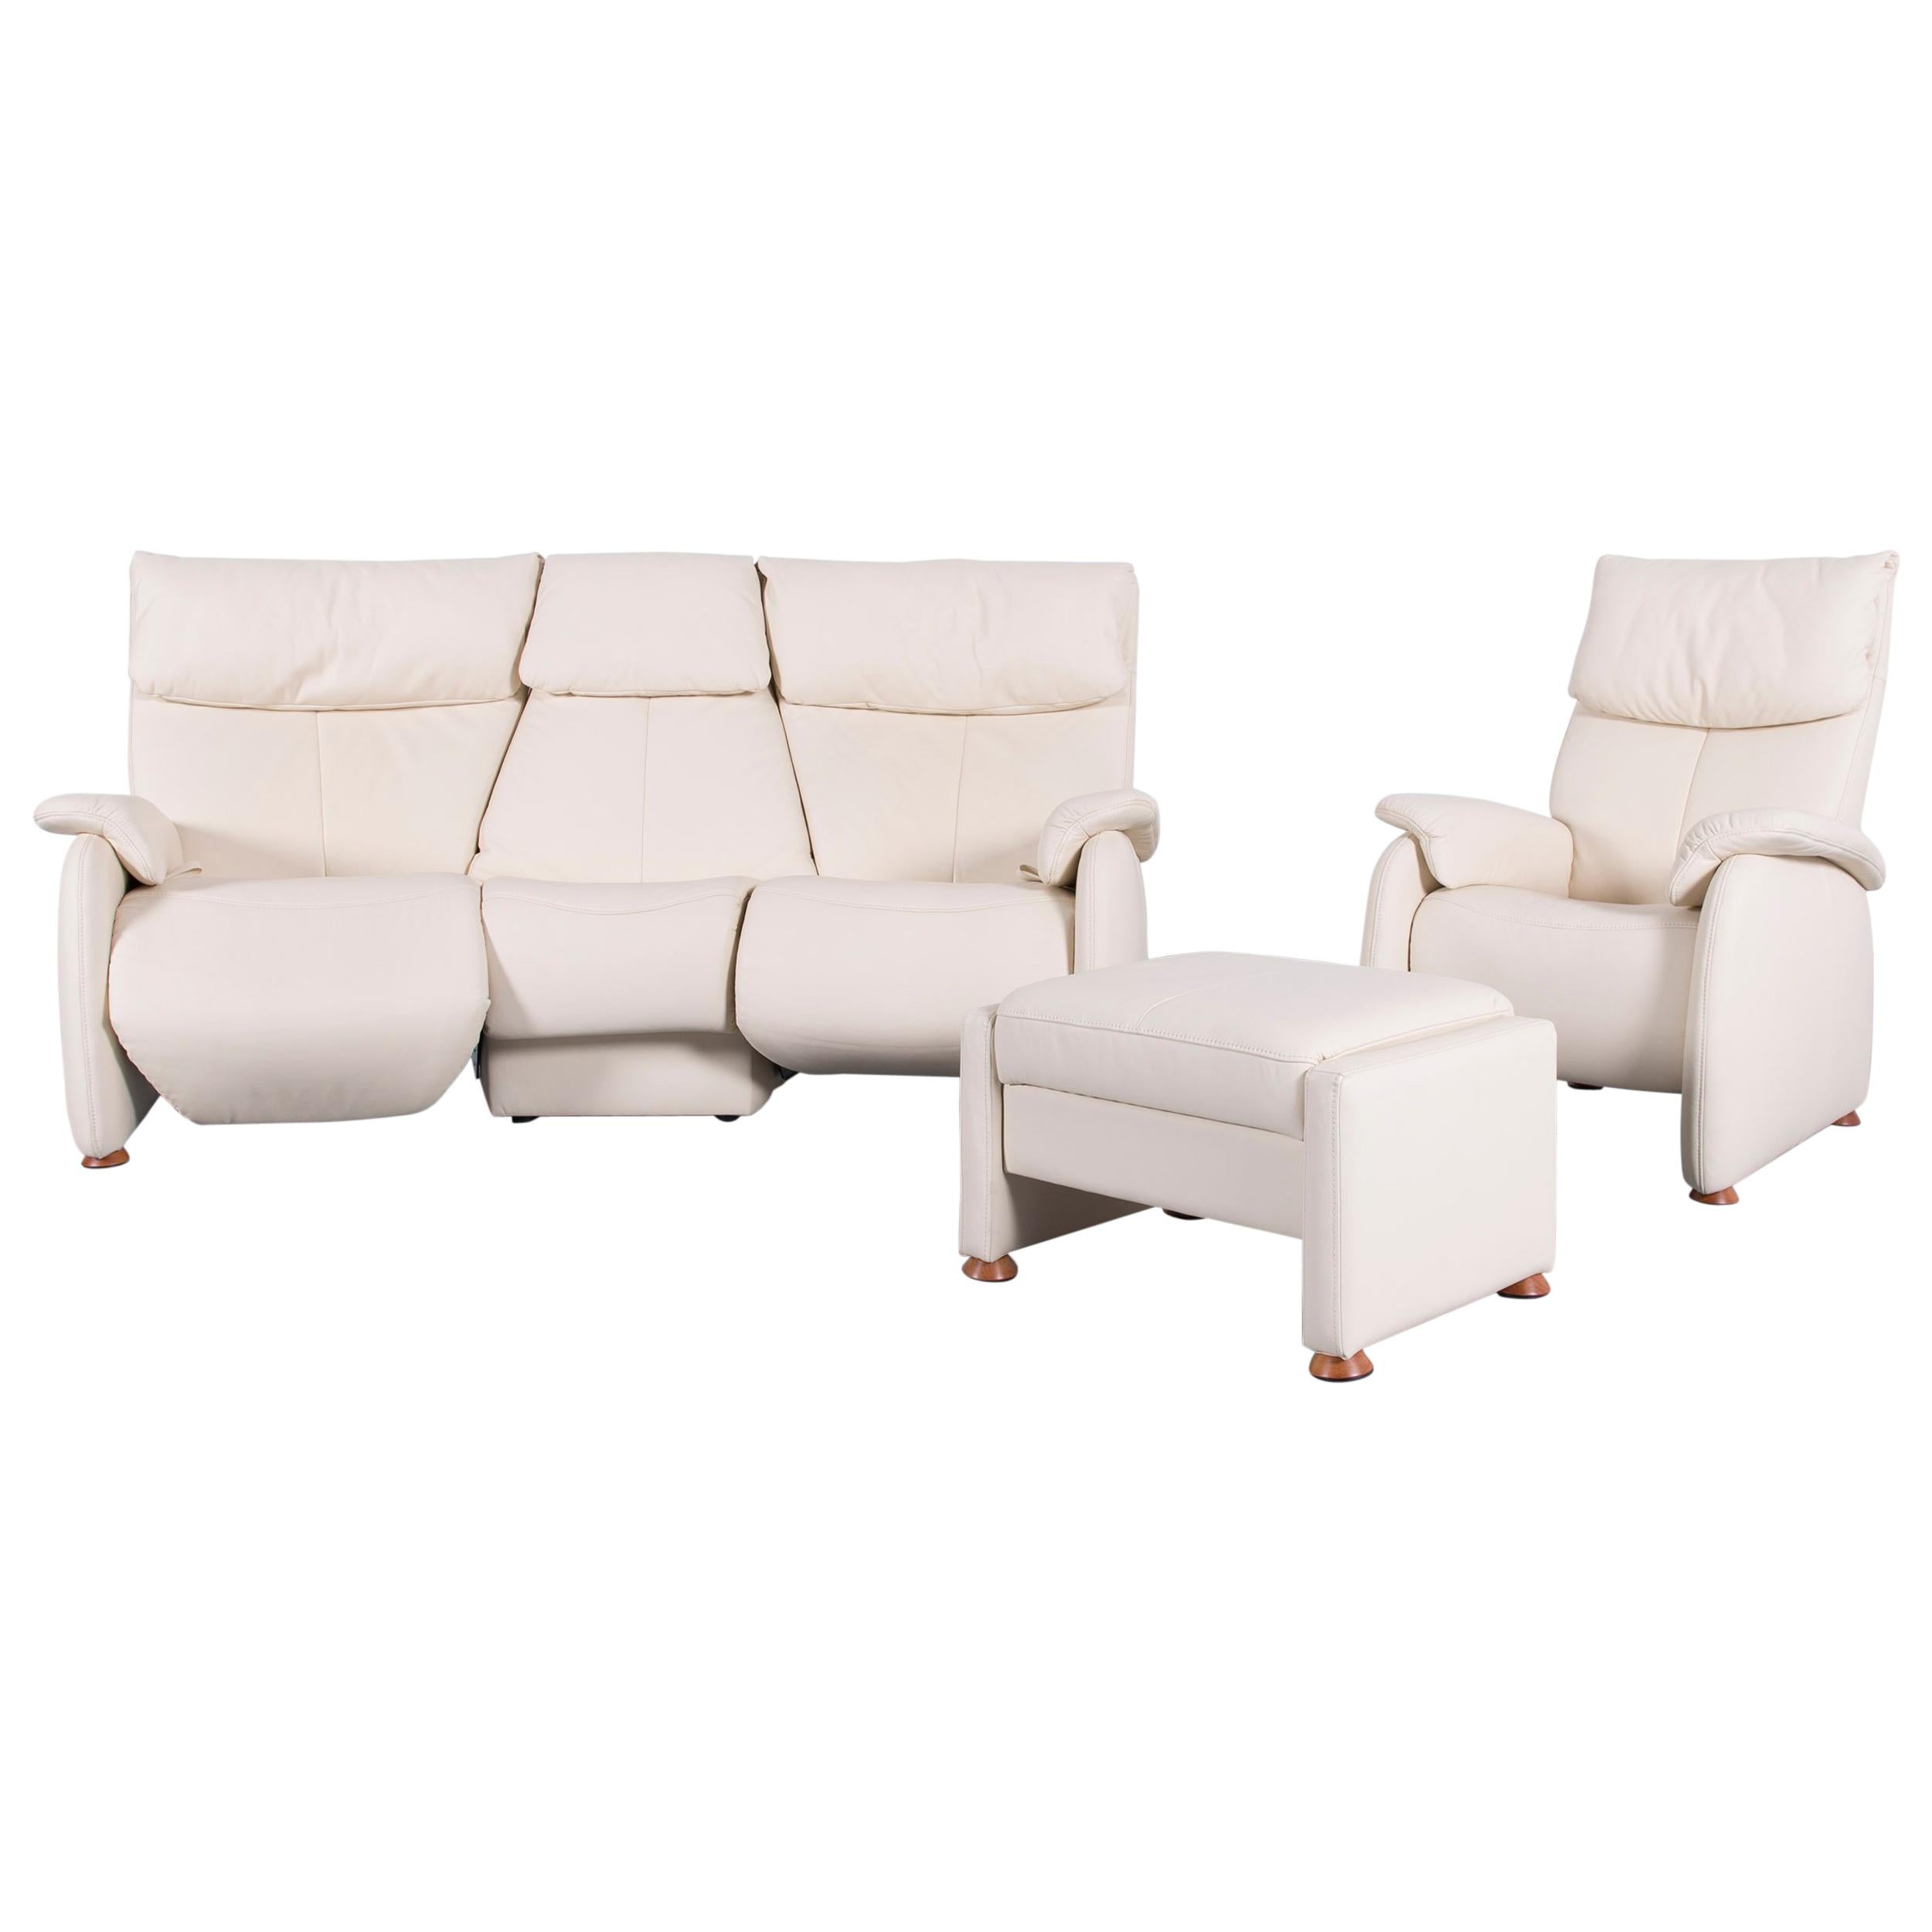 Himolla Trapez Sofa Off-White Three-Seat Couch Recliner